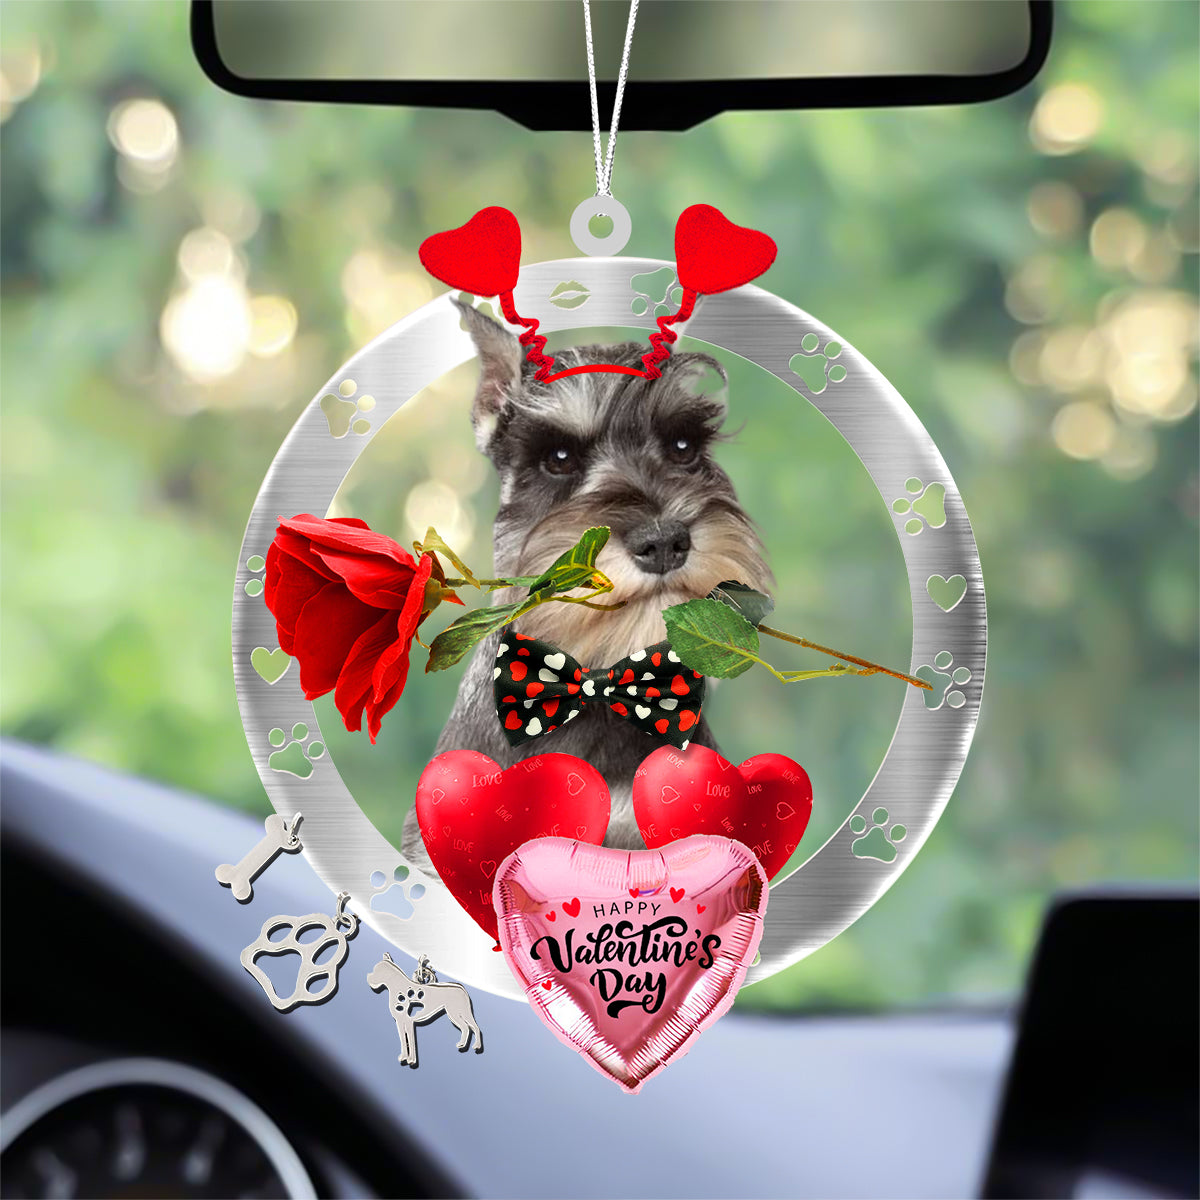 Schnauzer With Rose & Heart Balloon Ornament